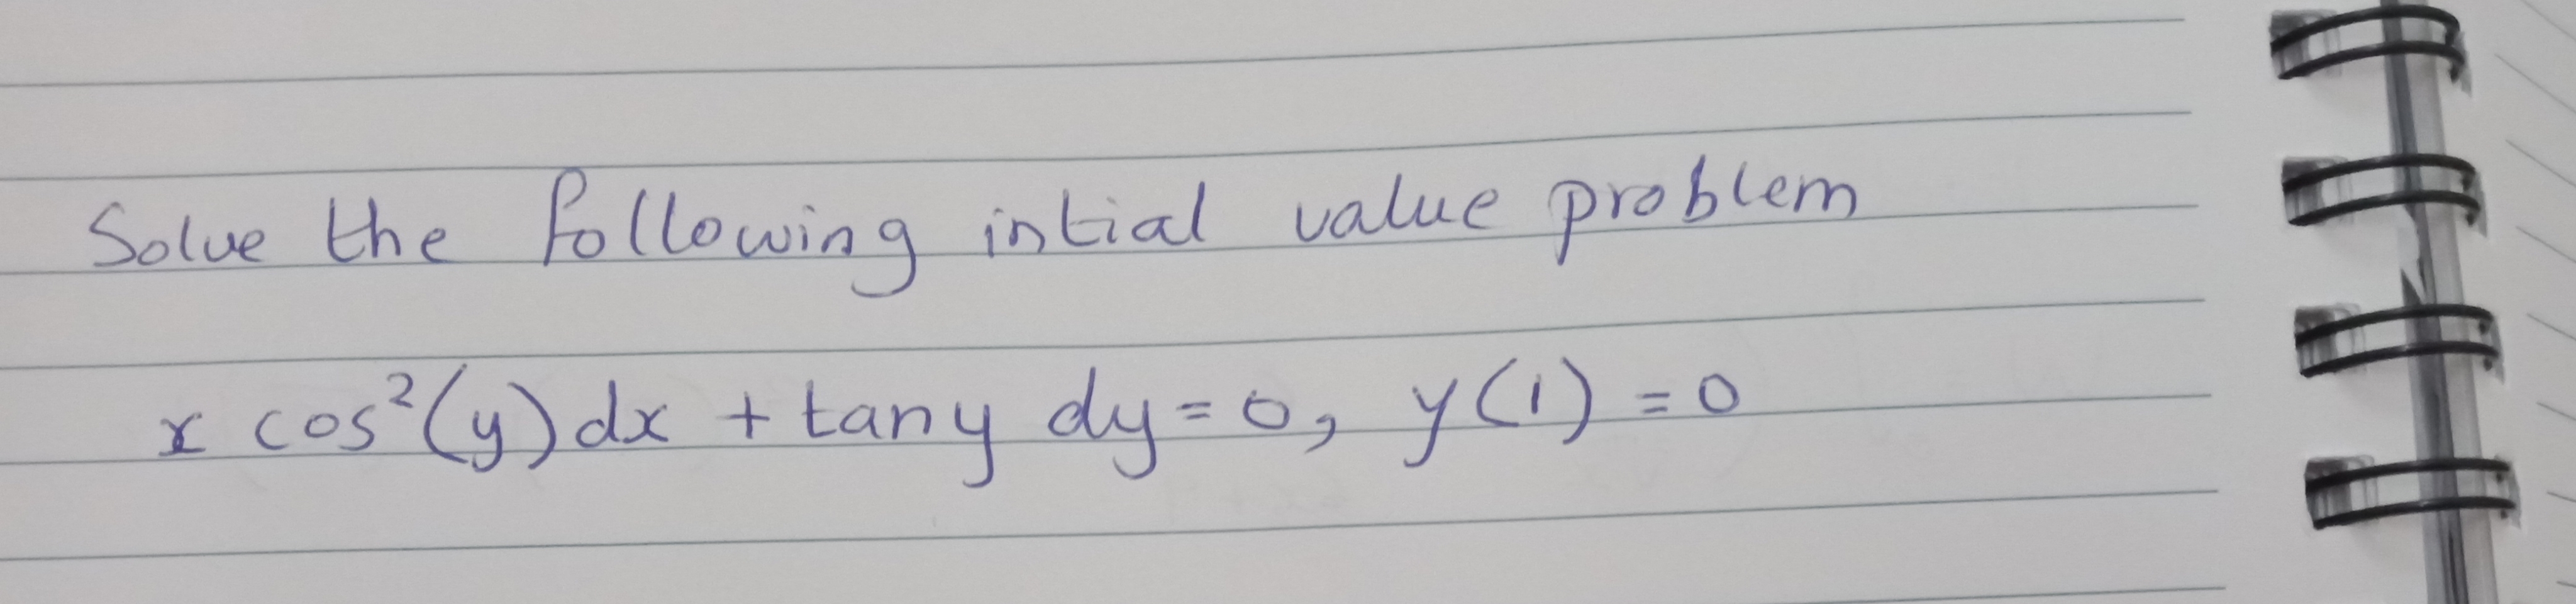 Solue the Following intial value problem
cos?(y)dx +
tany dy=0, y(1) = 0
